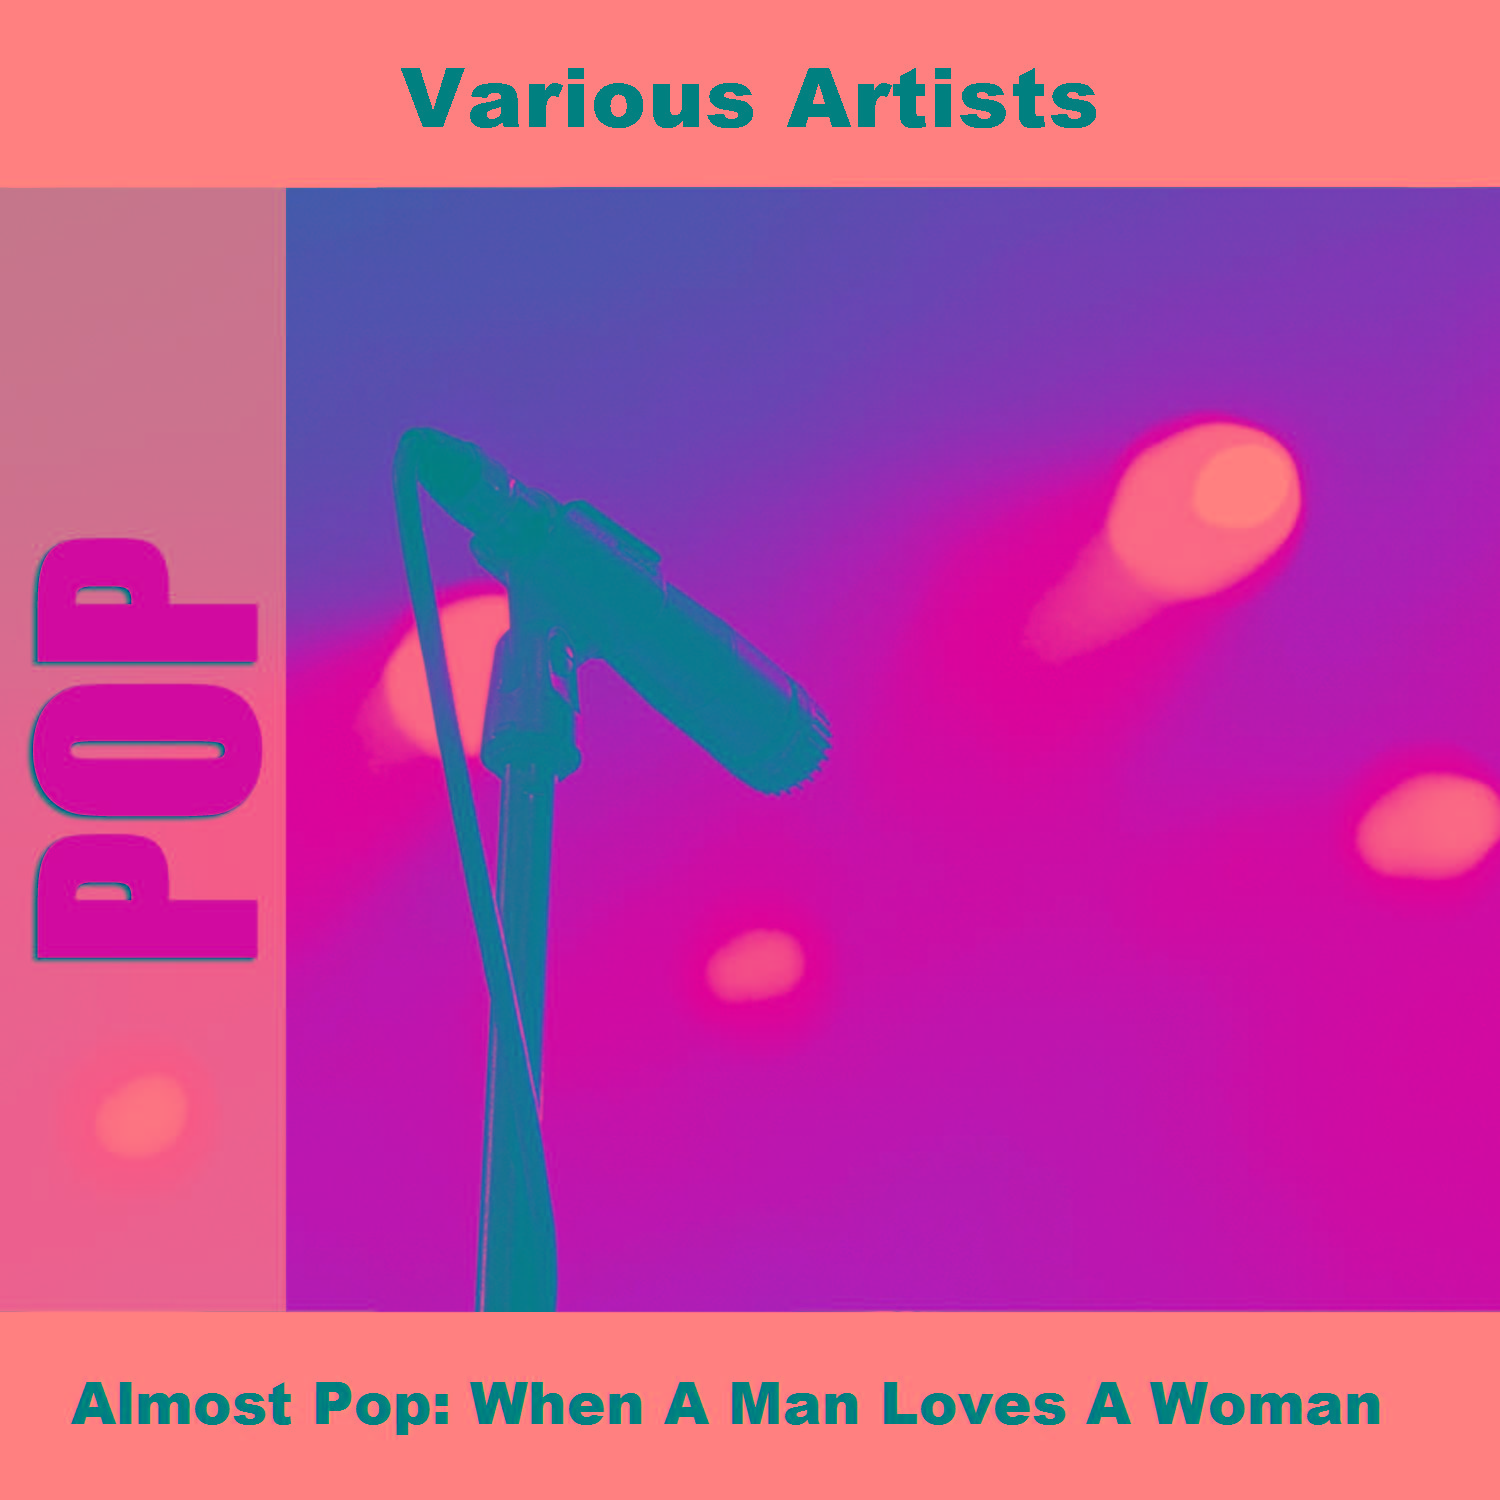 Almost Pop: When A Man Loves A Woman